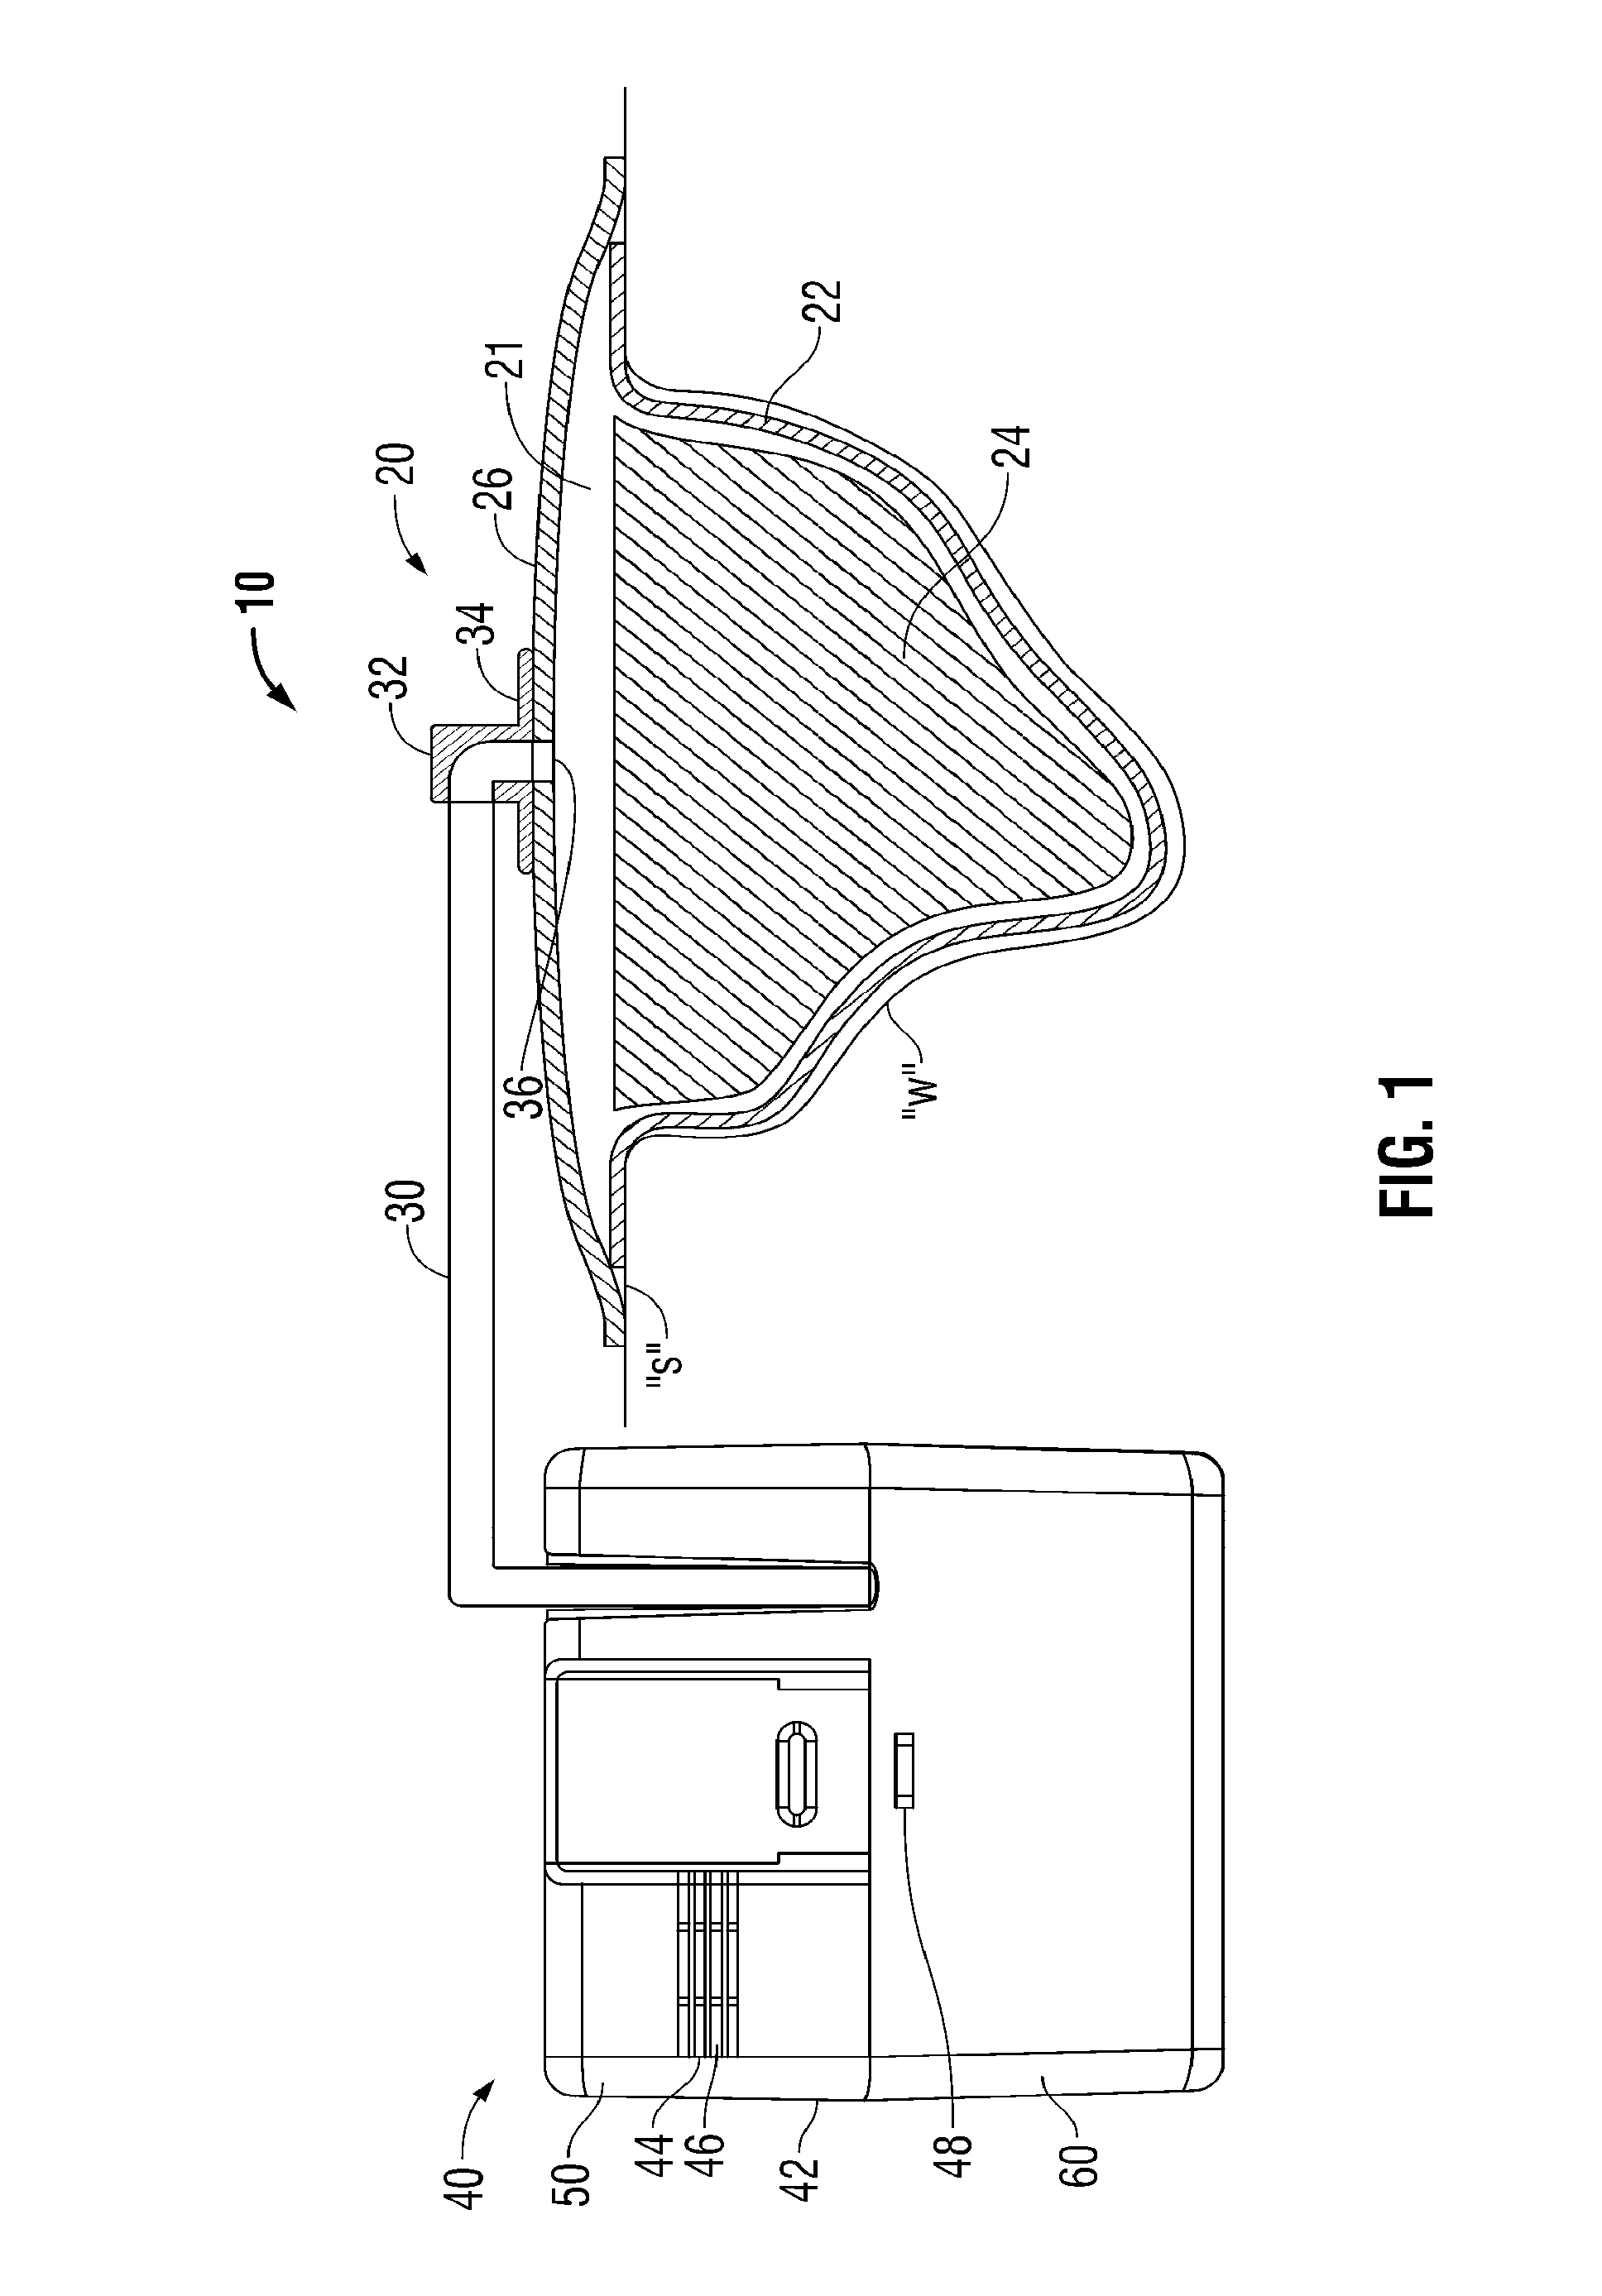 Chemically Coated Screen for Use with Hydrophobic Filters